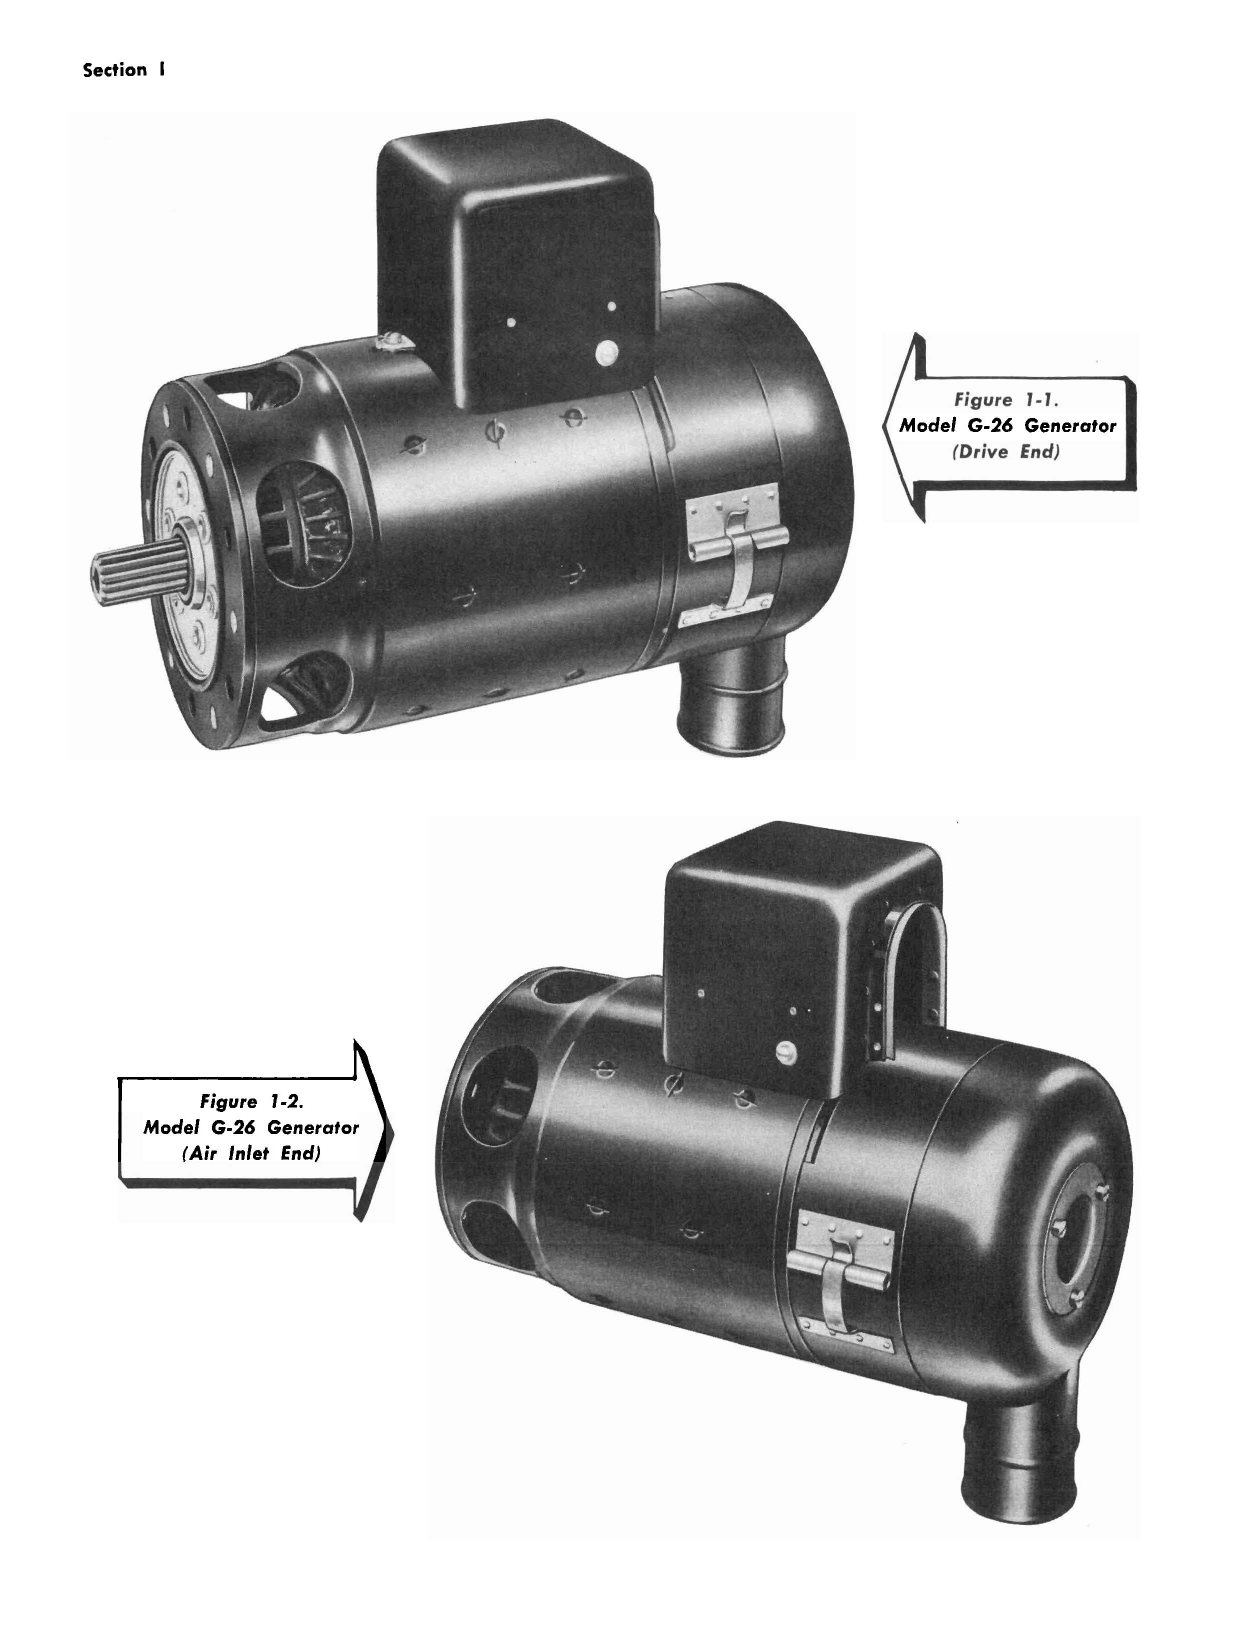 Sample page 5 from AirCorps Library document: Instructions with Parts Catalog for Jack & Heintz Generator - Model G26